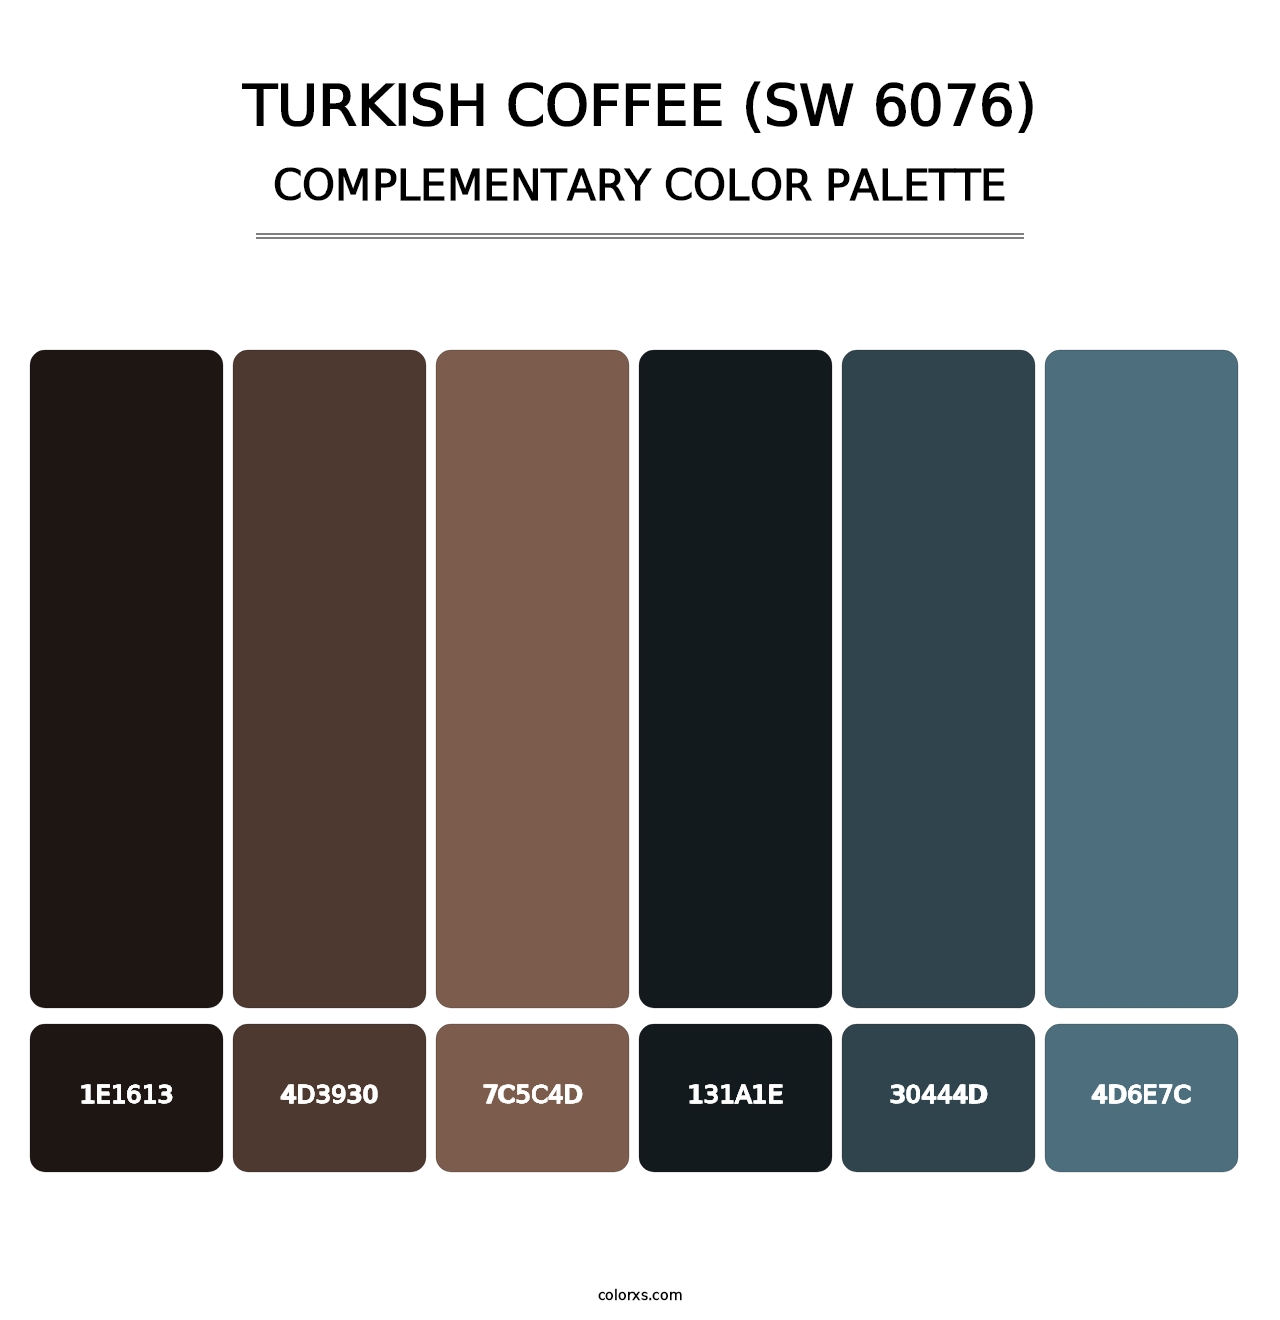 Turkish Coffee (SW 6076) - Complementary Color Palette